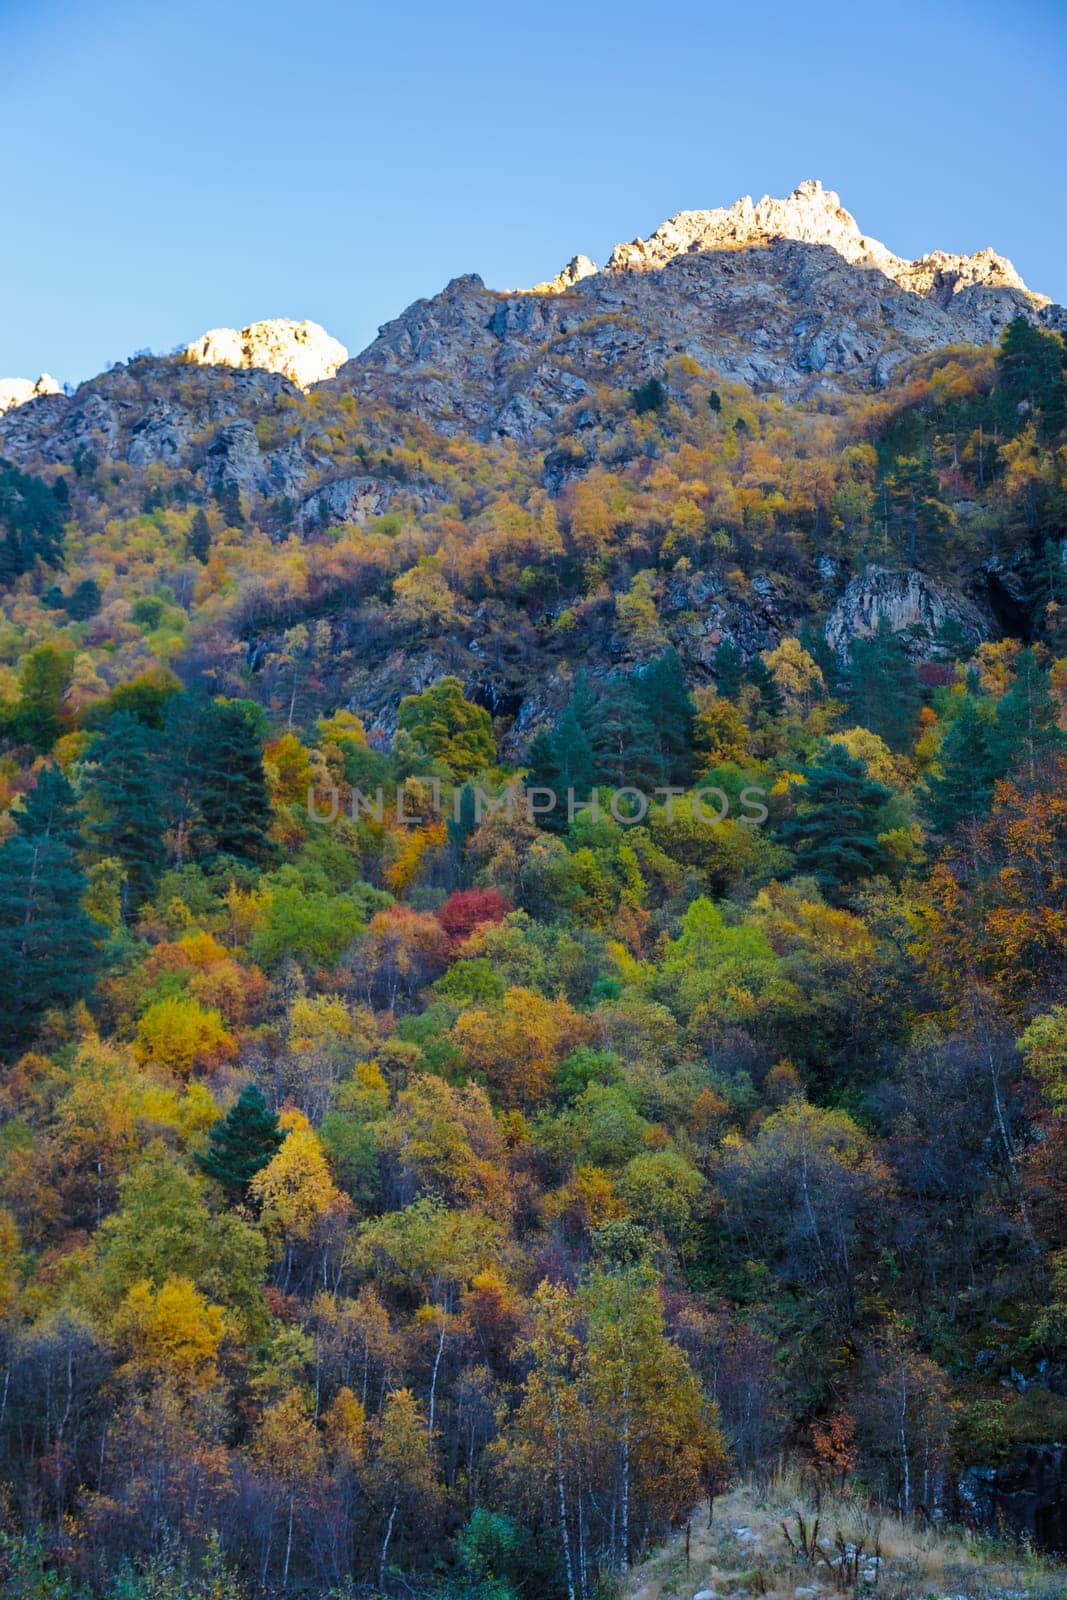 The picturesque autumn colors of the mountains reflect the grandeur and beauty of nature